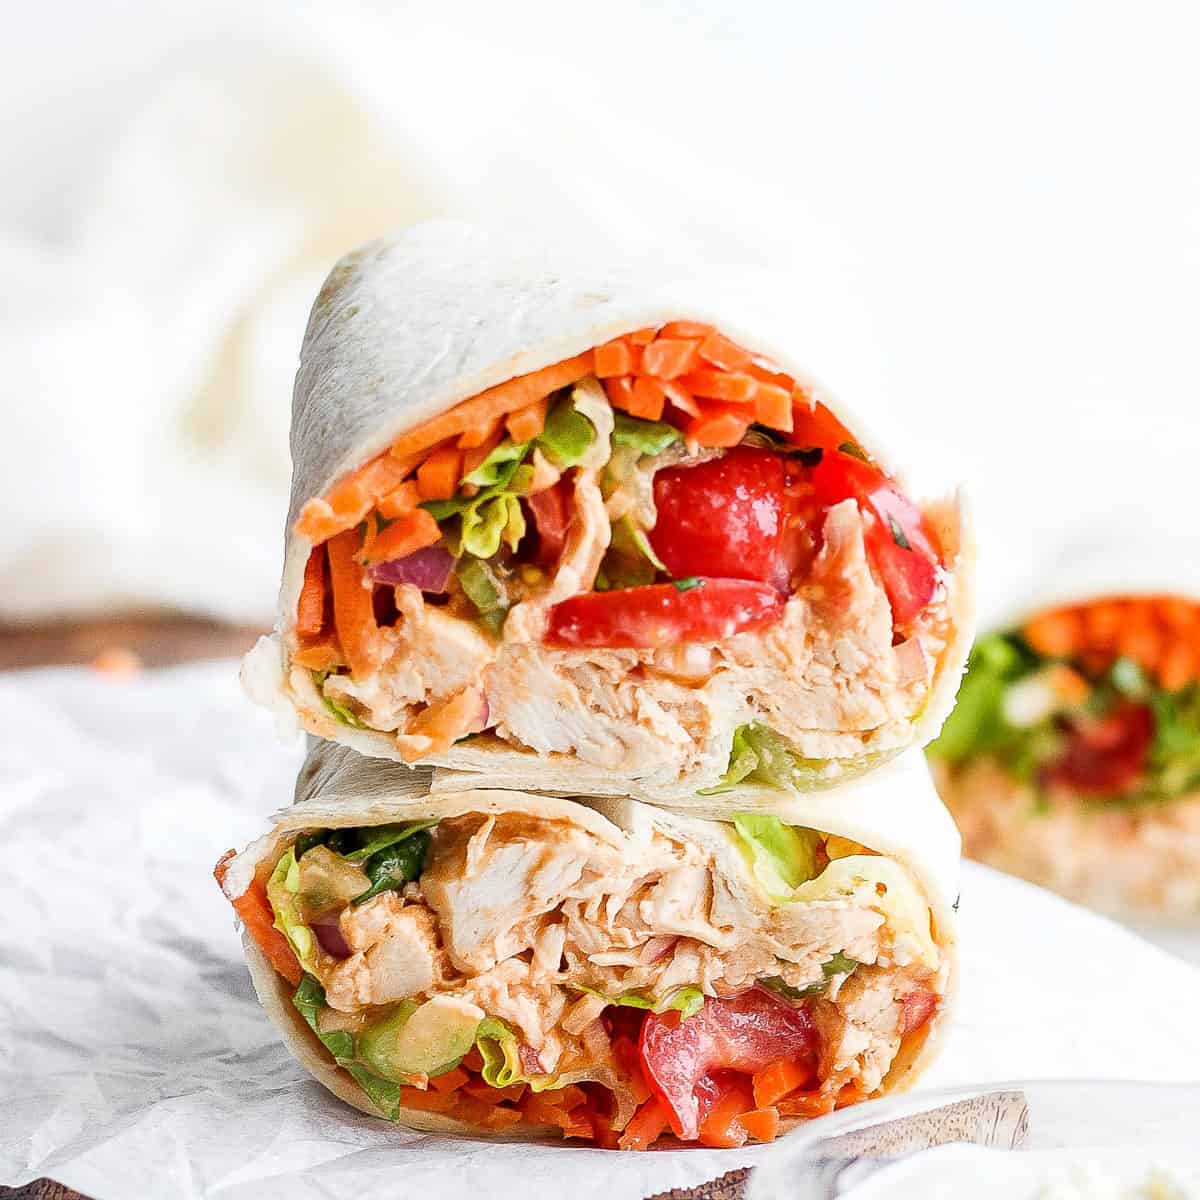 https://fitfoodiefinds.com/wp-content/uploads/2021/12/Buffalo-Chicken-Wrap-03sq.jpg